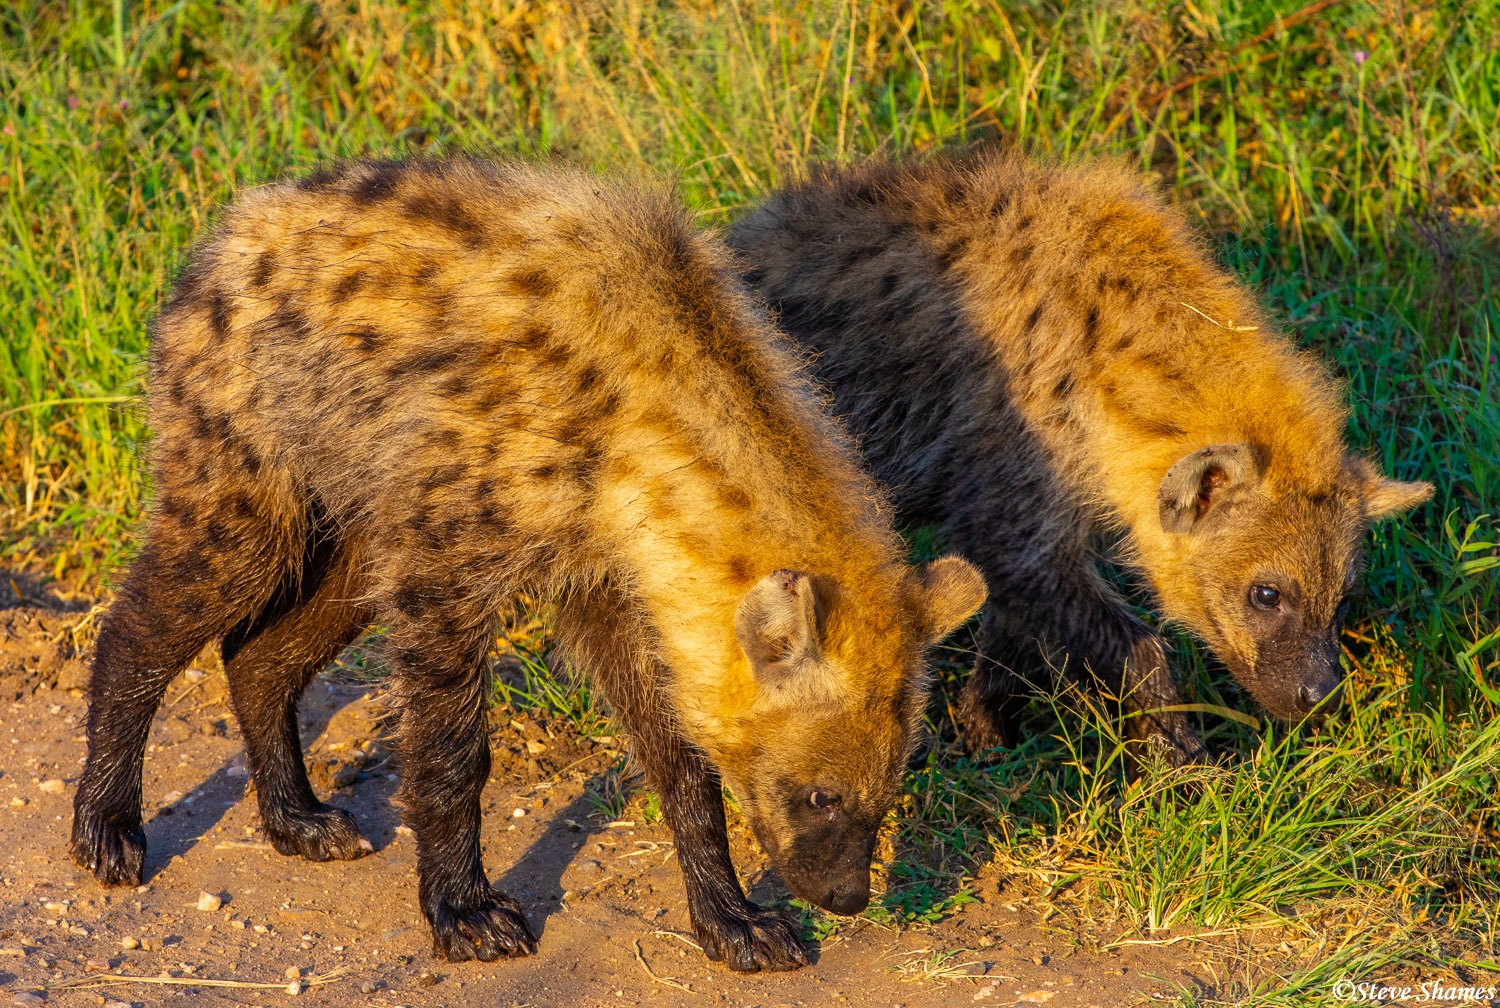 Two young hyenas grubbing around in the early morning.